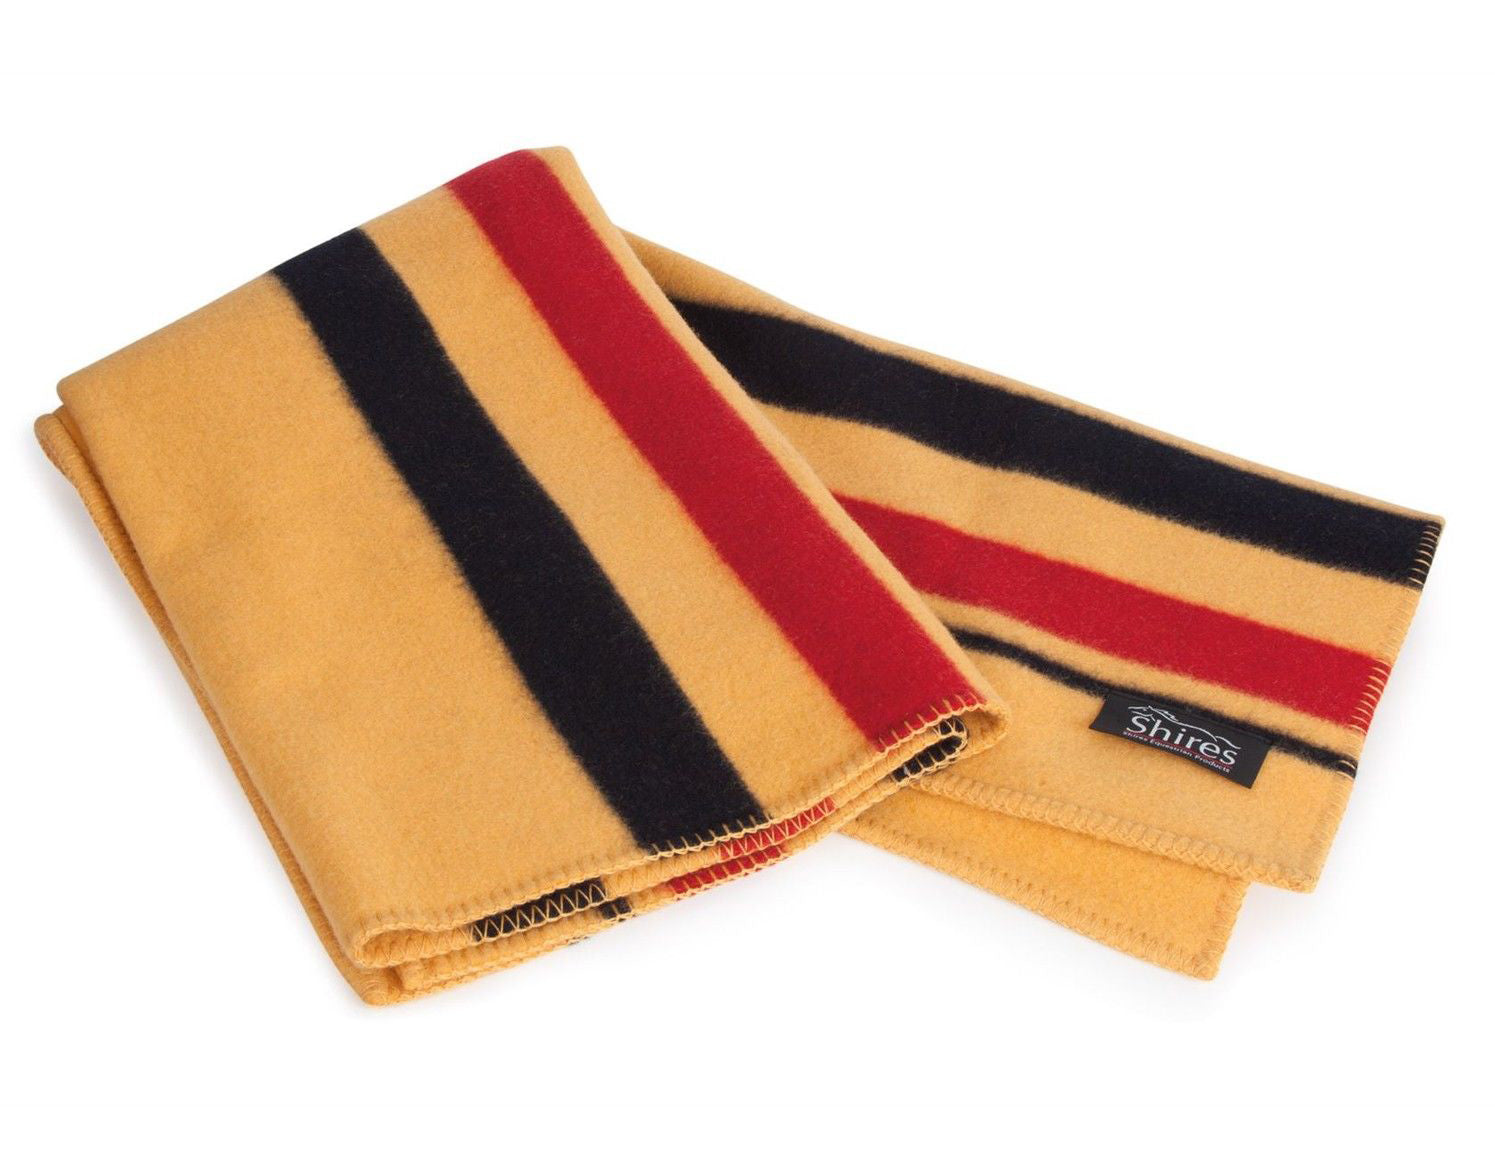 Shires Newmarket Witney Square Wool Blanket - North Shore Saddlery